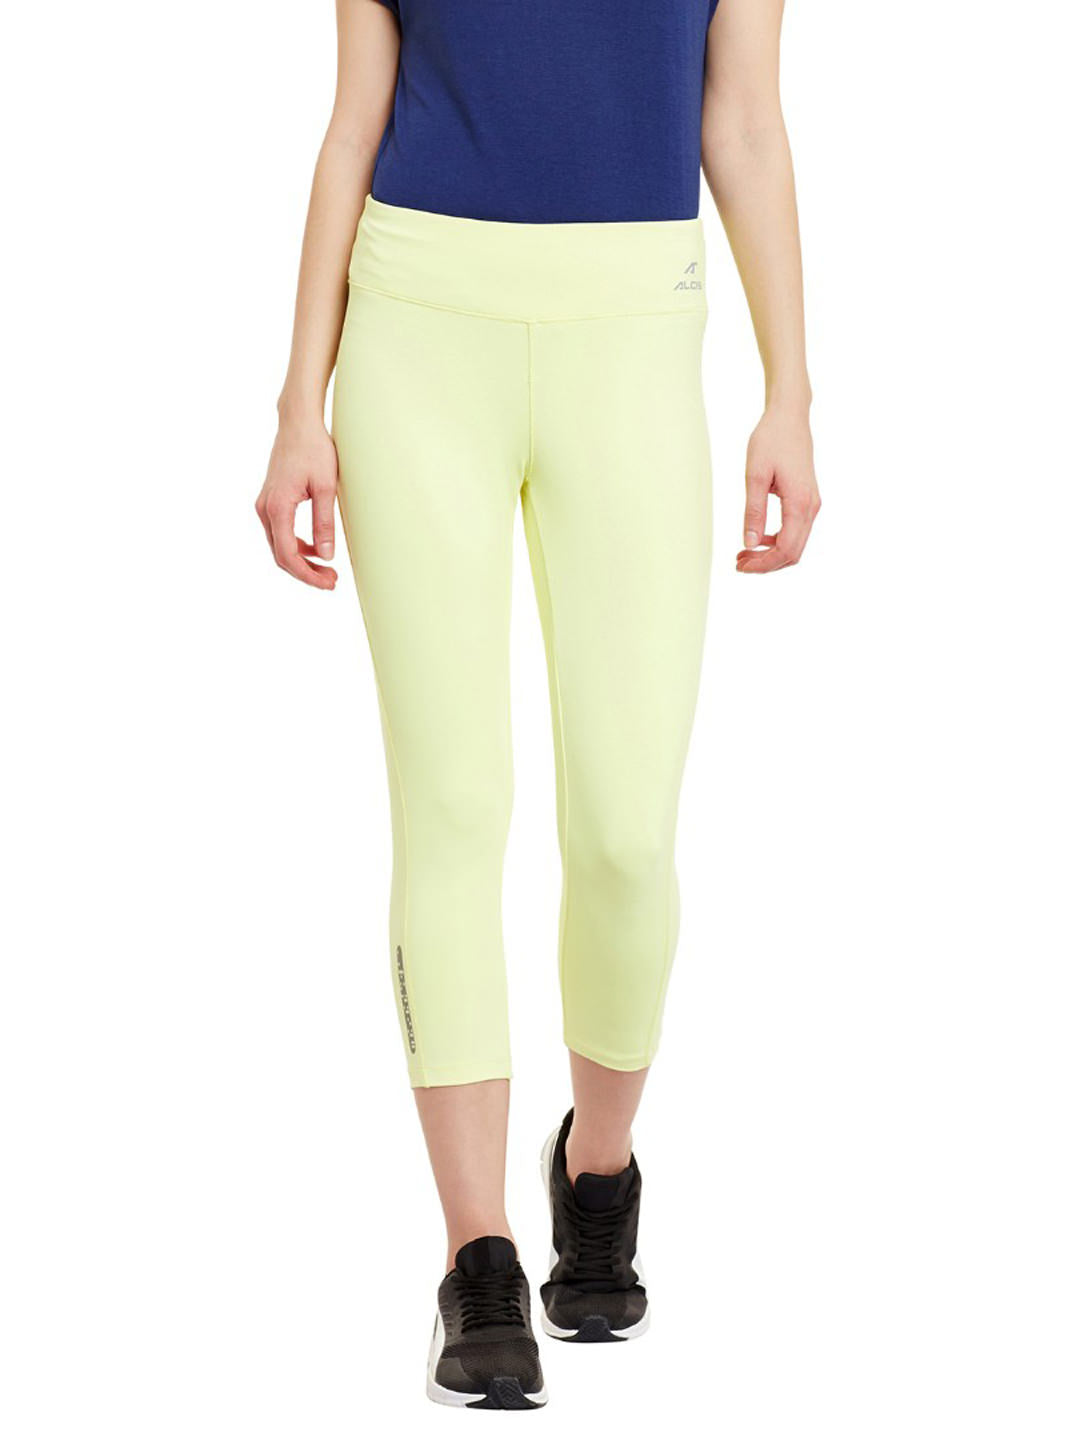 Alcis Yellow Core Fit Tights ALWPA151455 ALWPA151455-XS